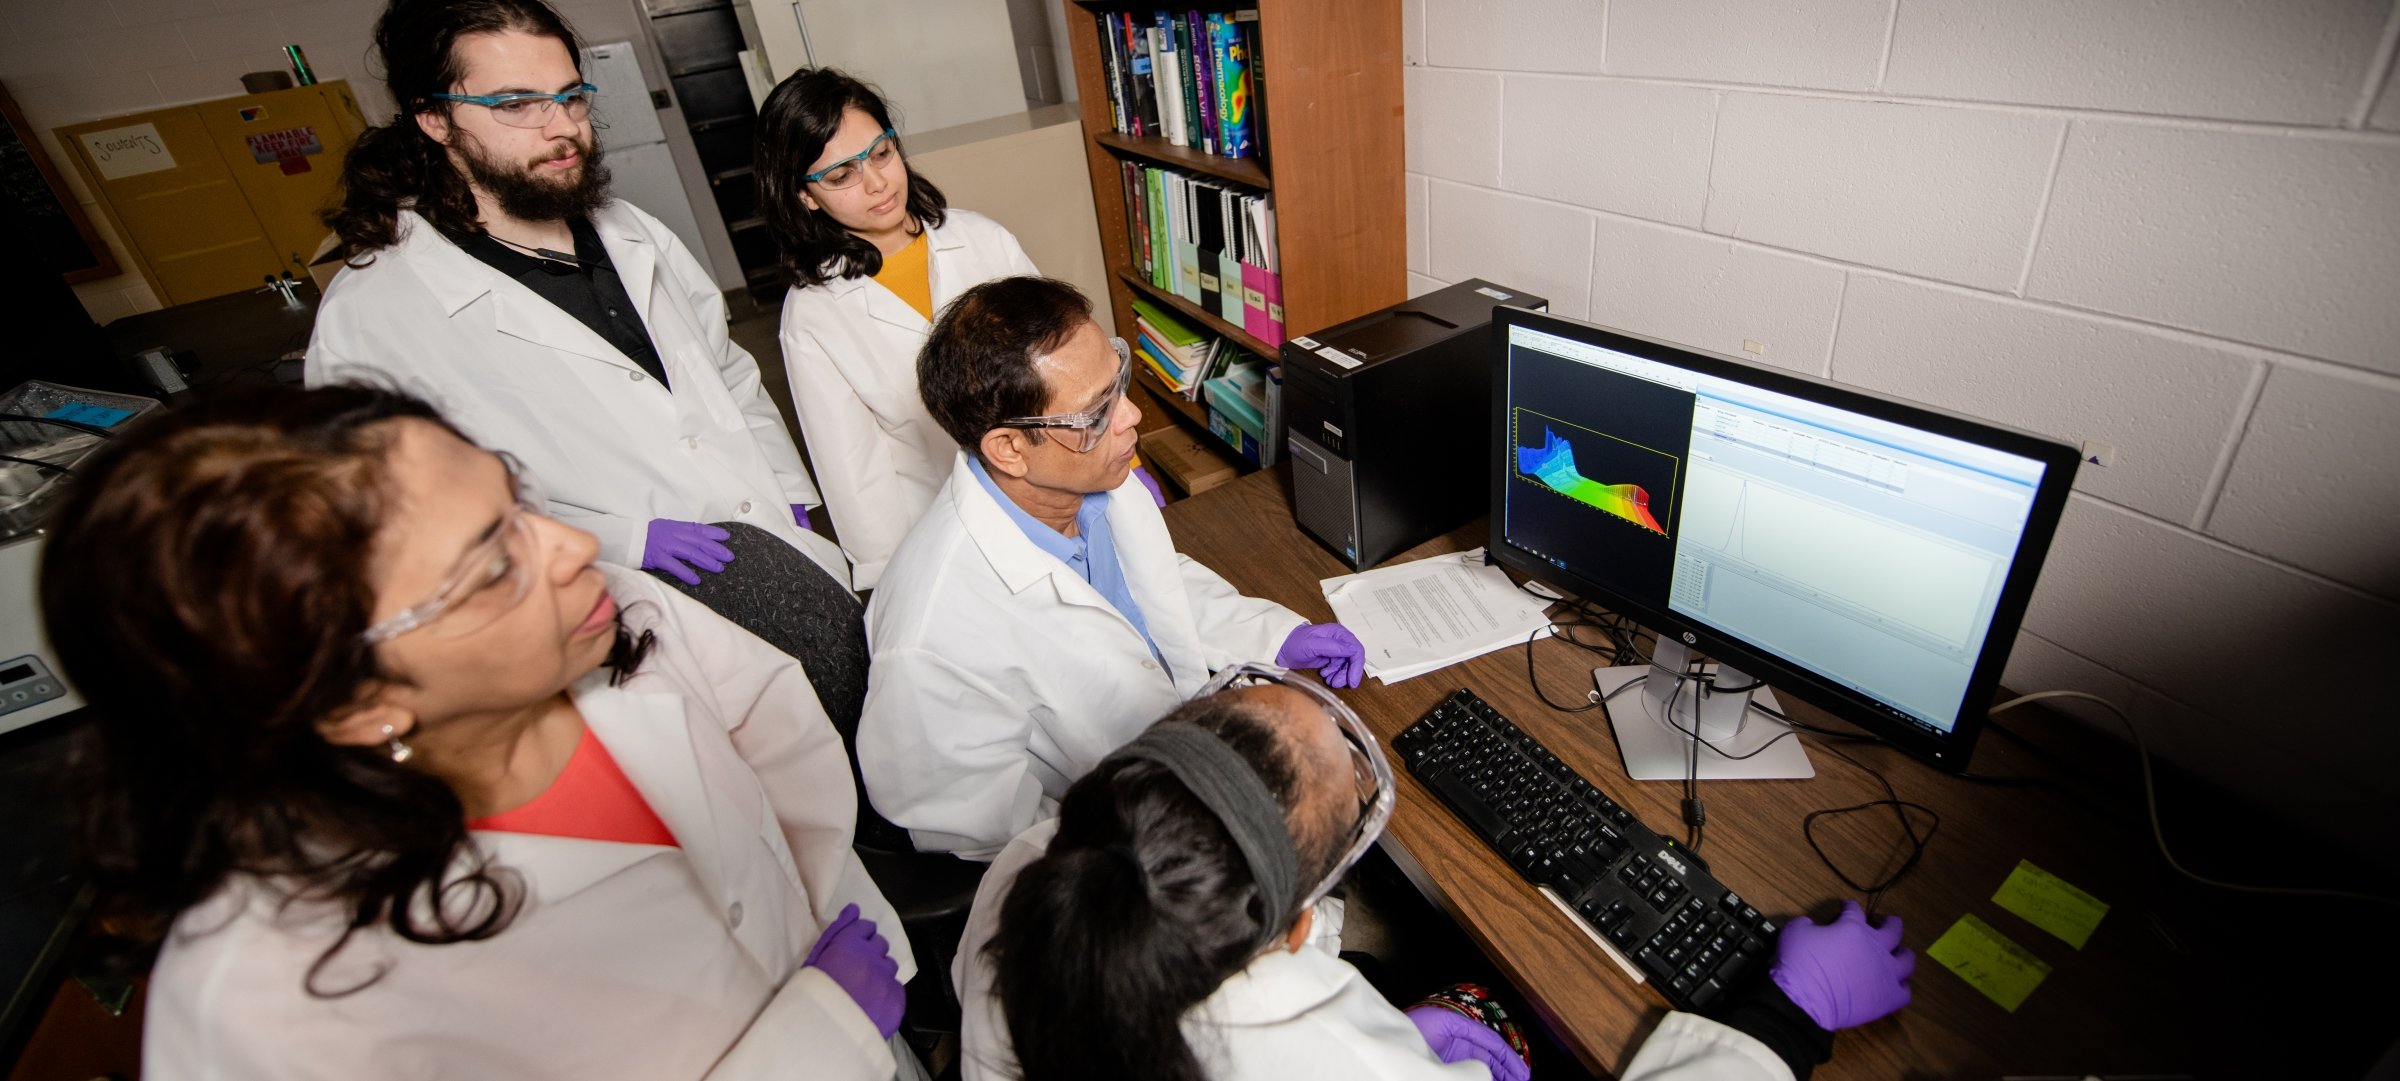 Grad students and faculty looking at a computer with labcoats, gloves and glasses